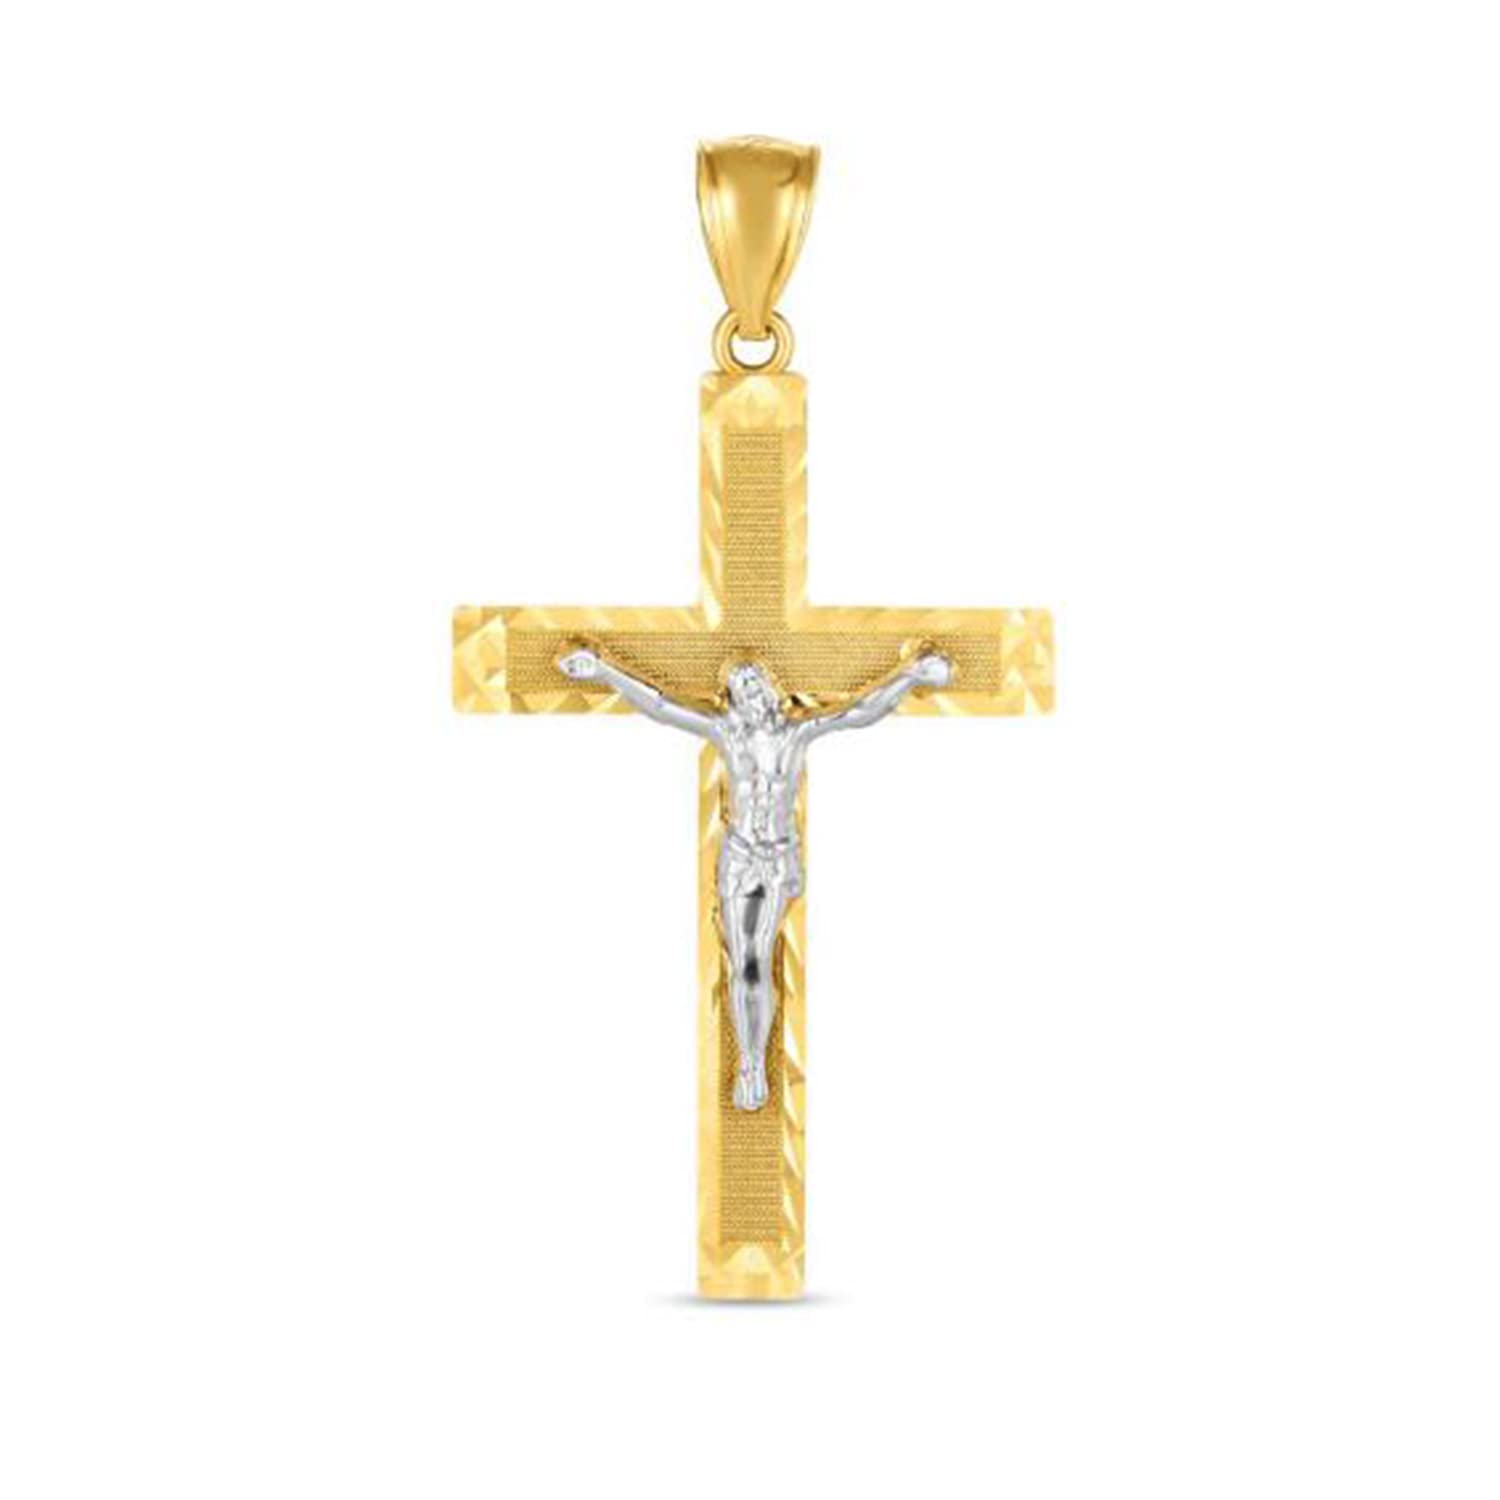 14K Yellow And White Gold Texture Jesus Cross Charm Pendant fine designer jewelry for men and women